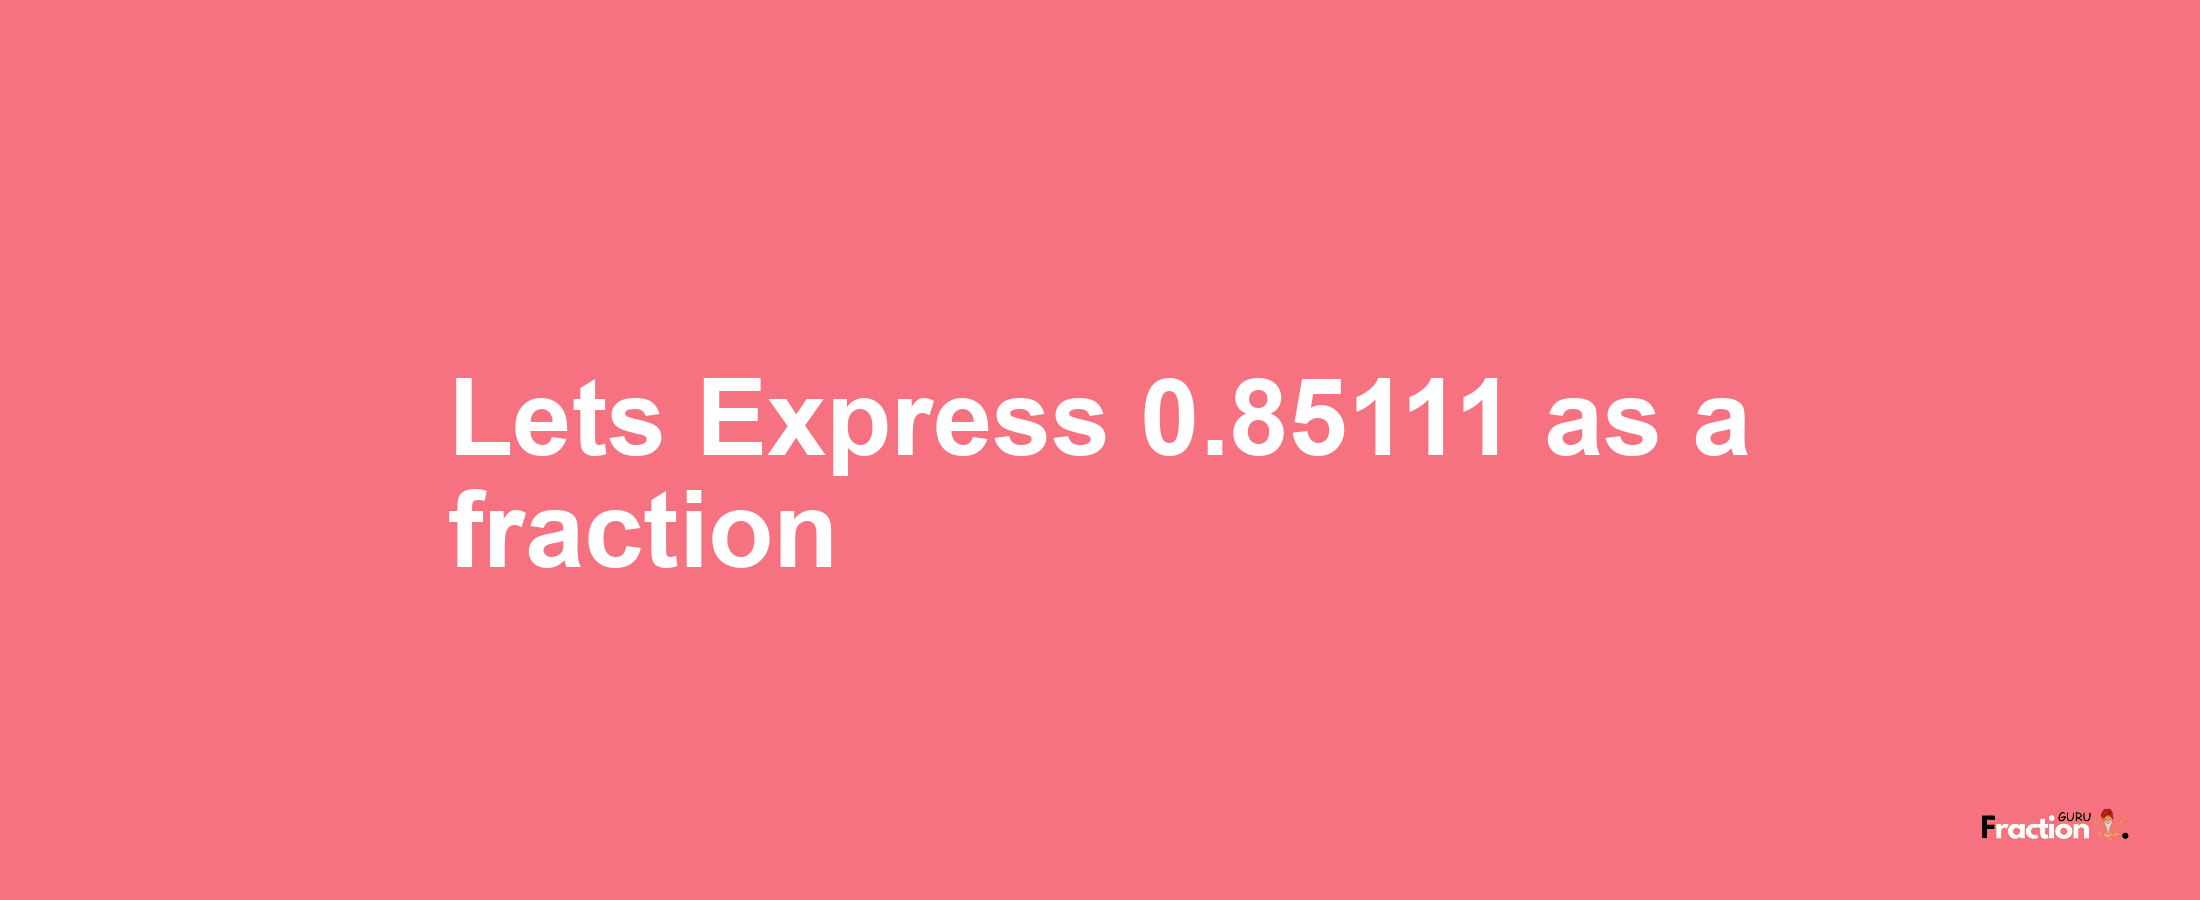 Lets Express 0.85111 as afraction